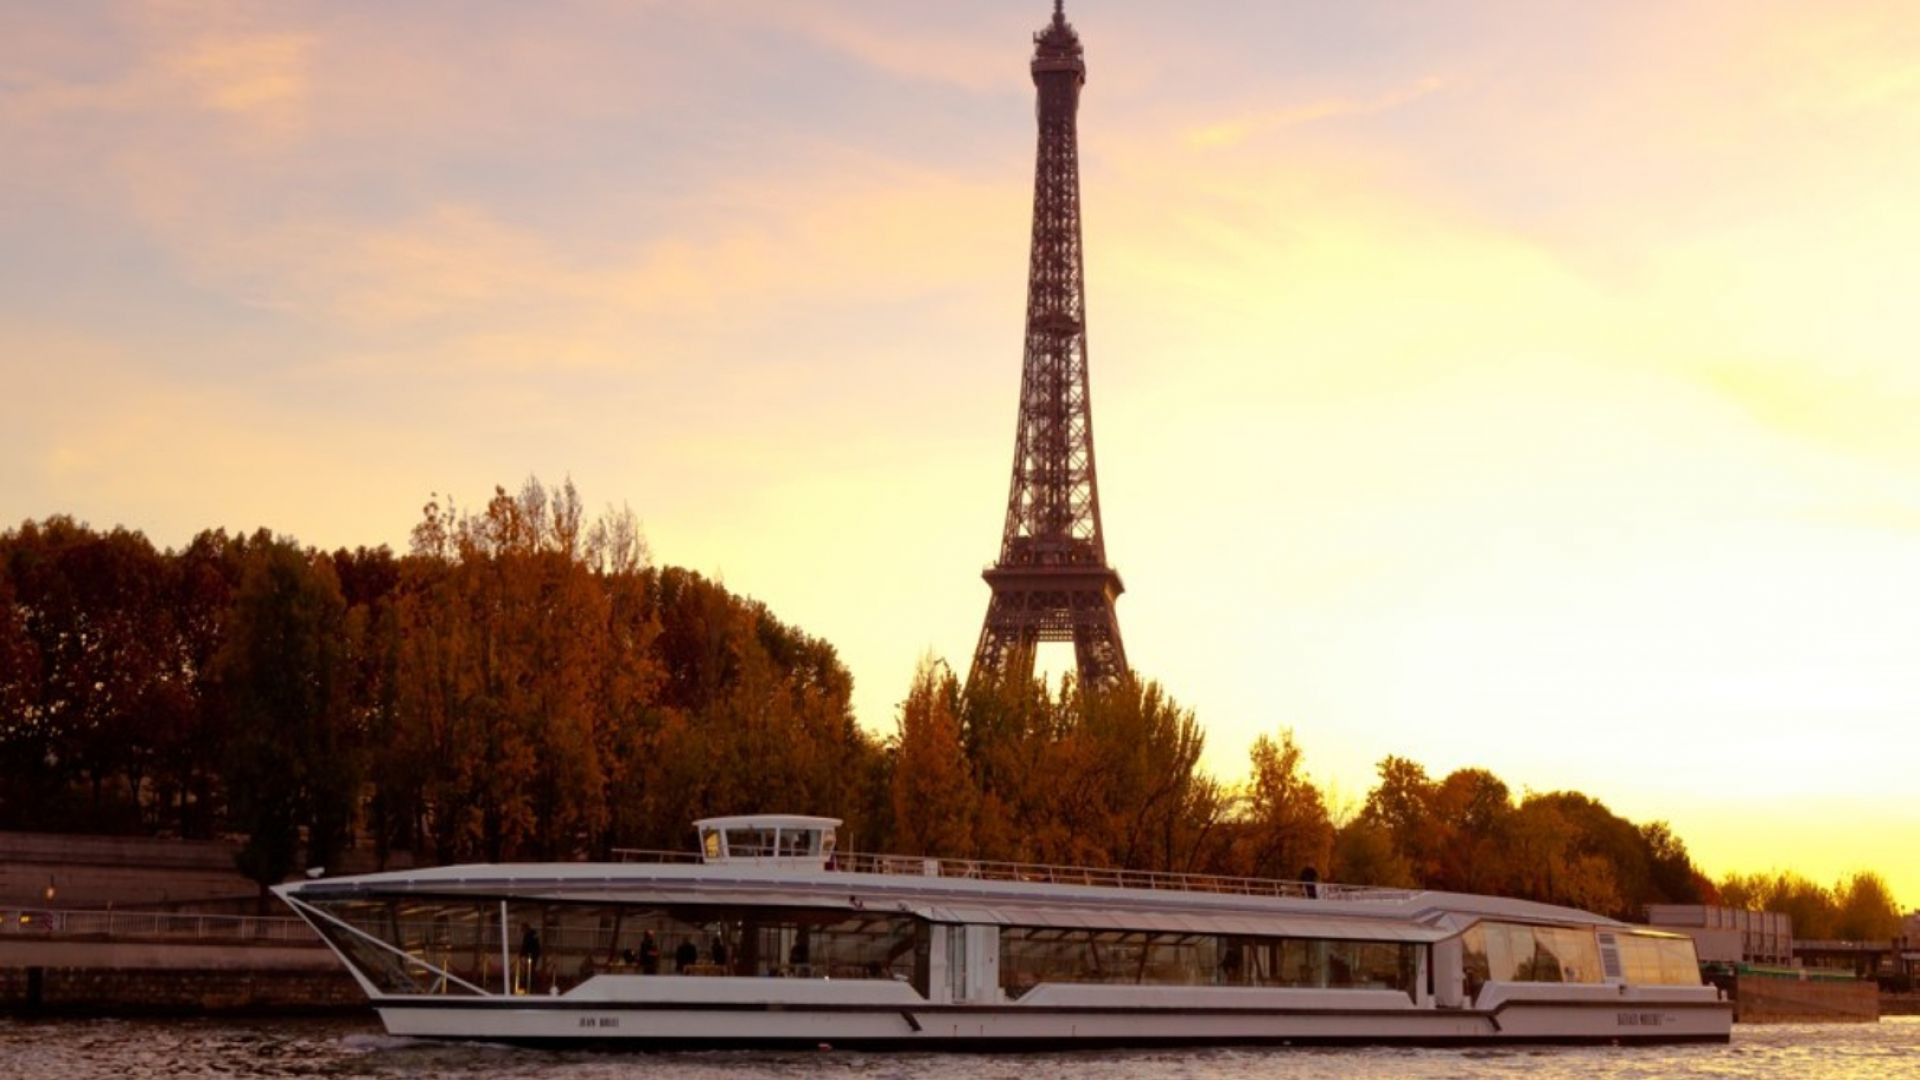 Bateaux Mouches: Romantic Dinner Cruise with Prestige dinner menu